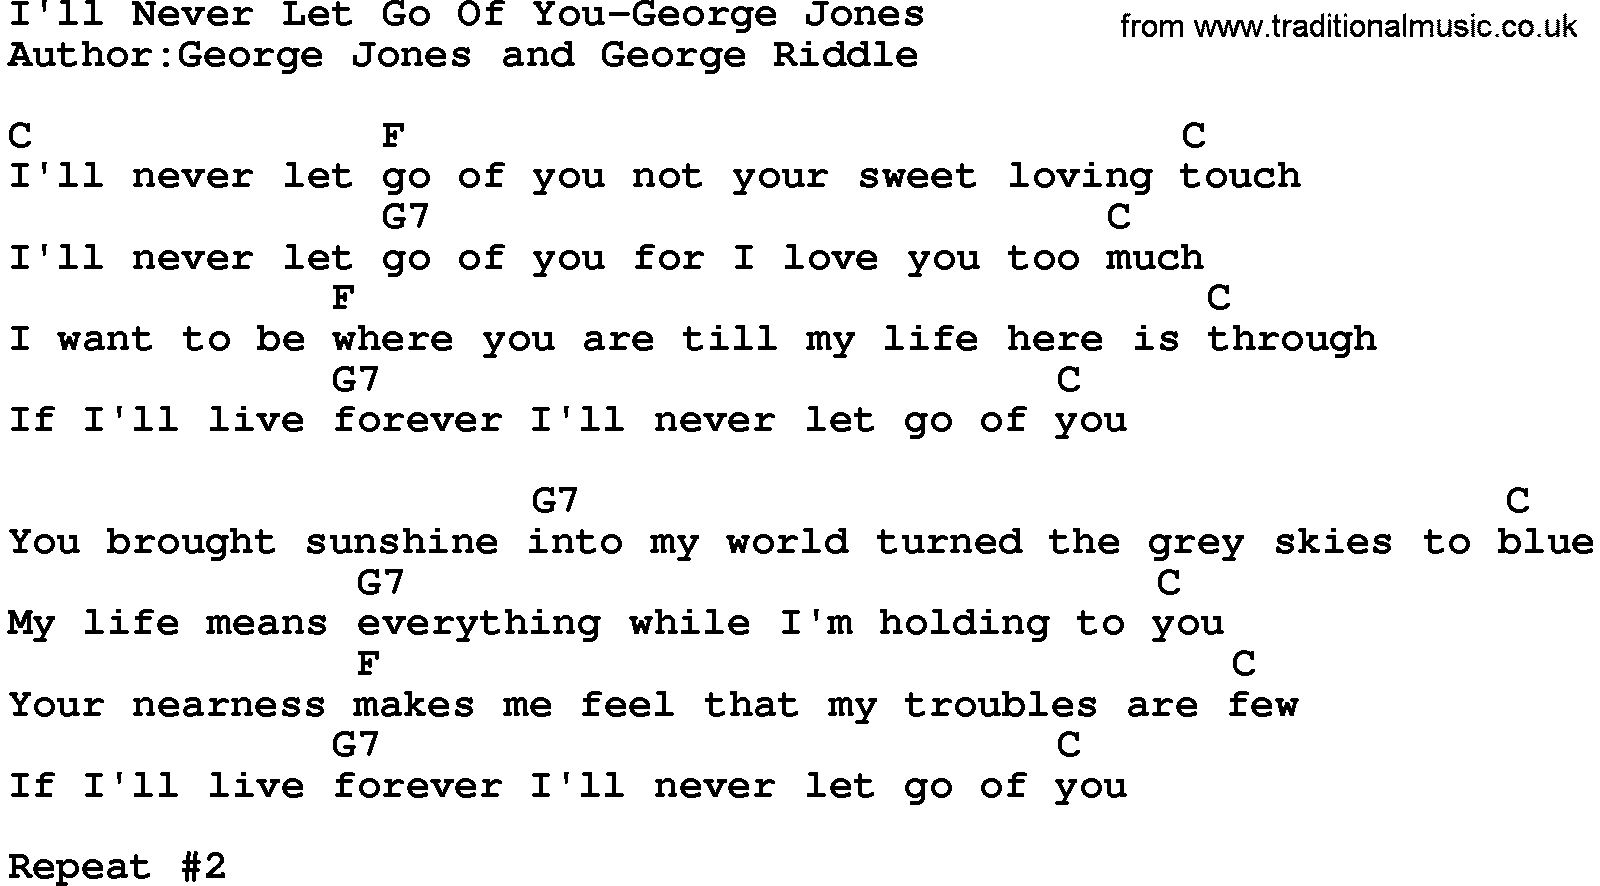 Country music song: I'll Never Let Go Of You-George Jones lyrics and chords